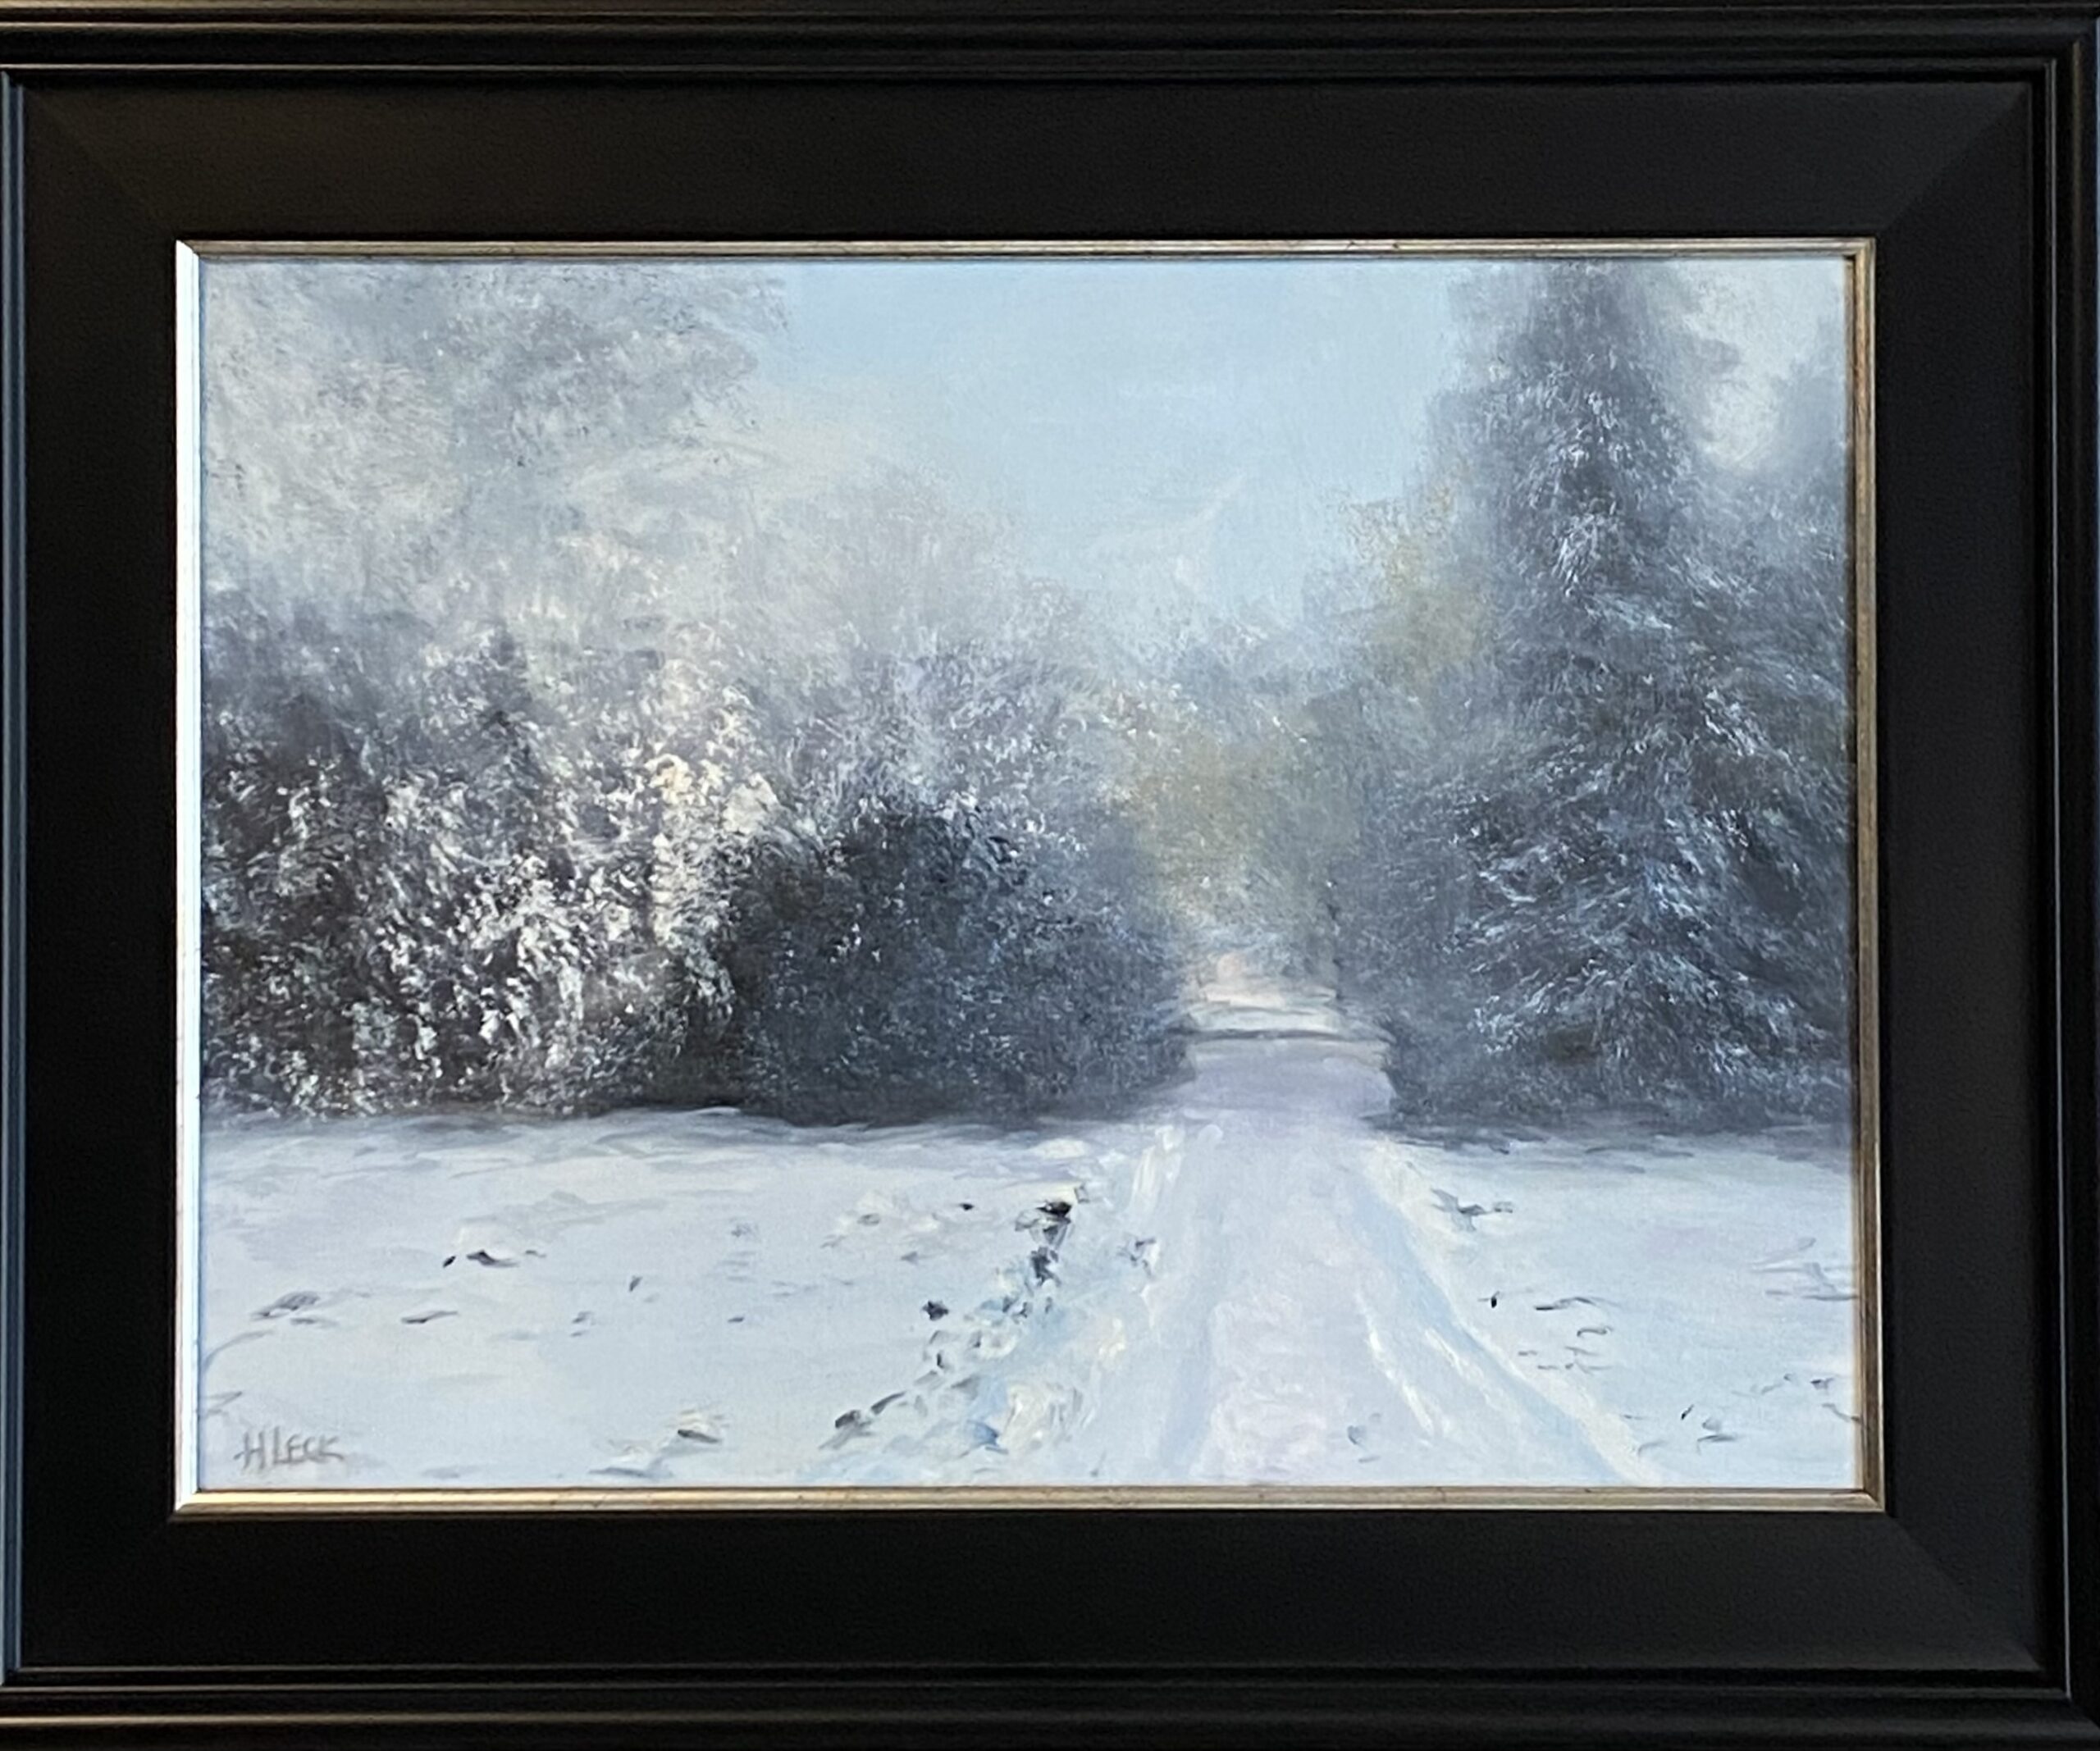 Painting of a snowy path through a winter forest